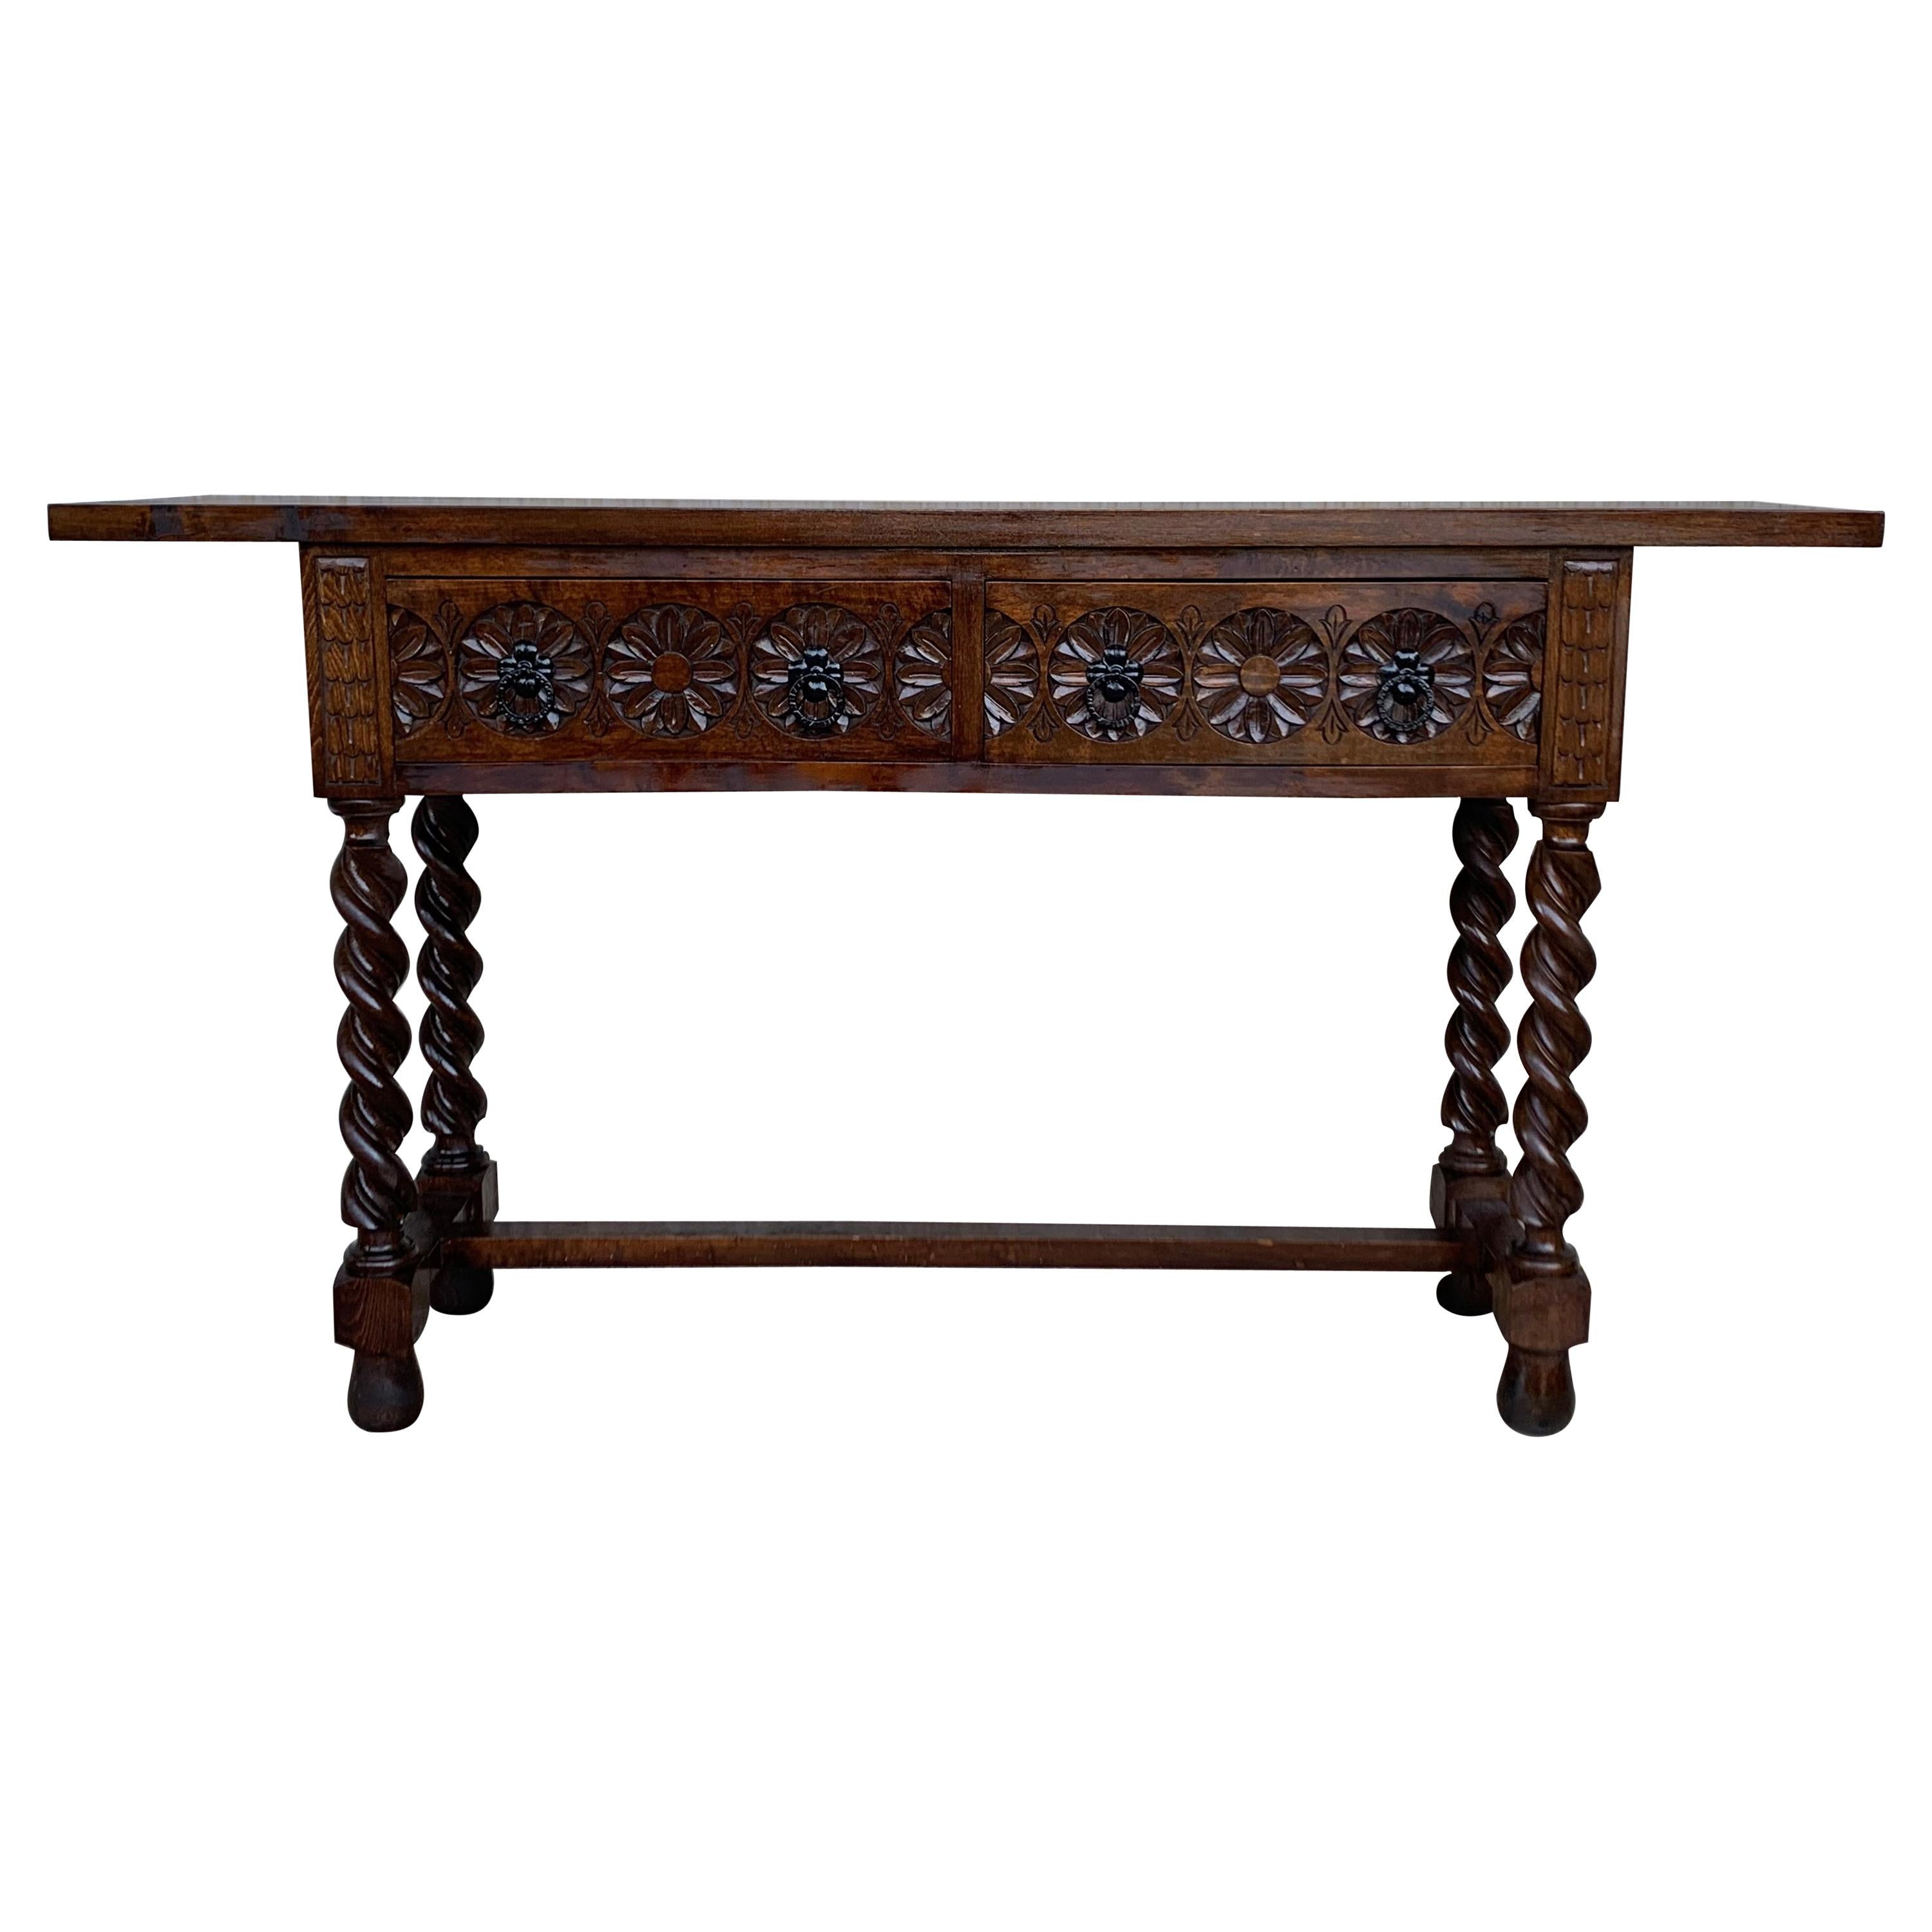 20th Century Spanish Tuscan Console Table with Two Drawers and Solomonic Legs